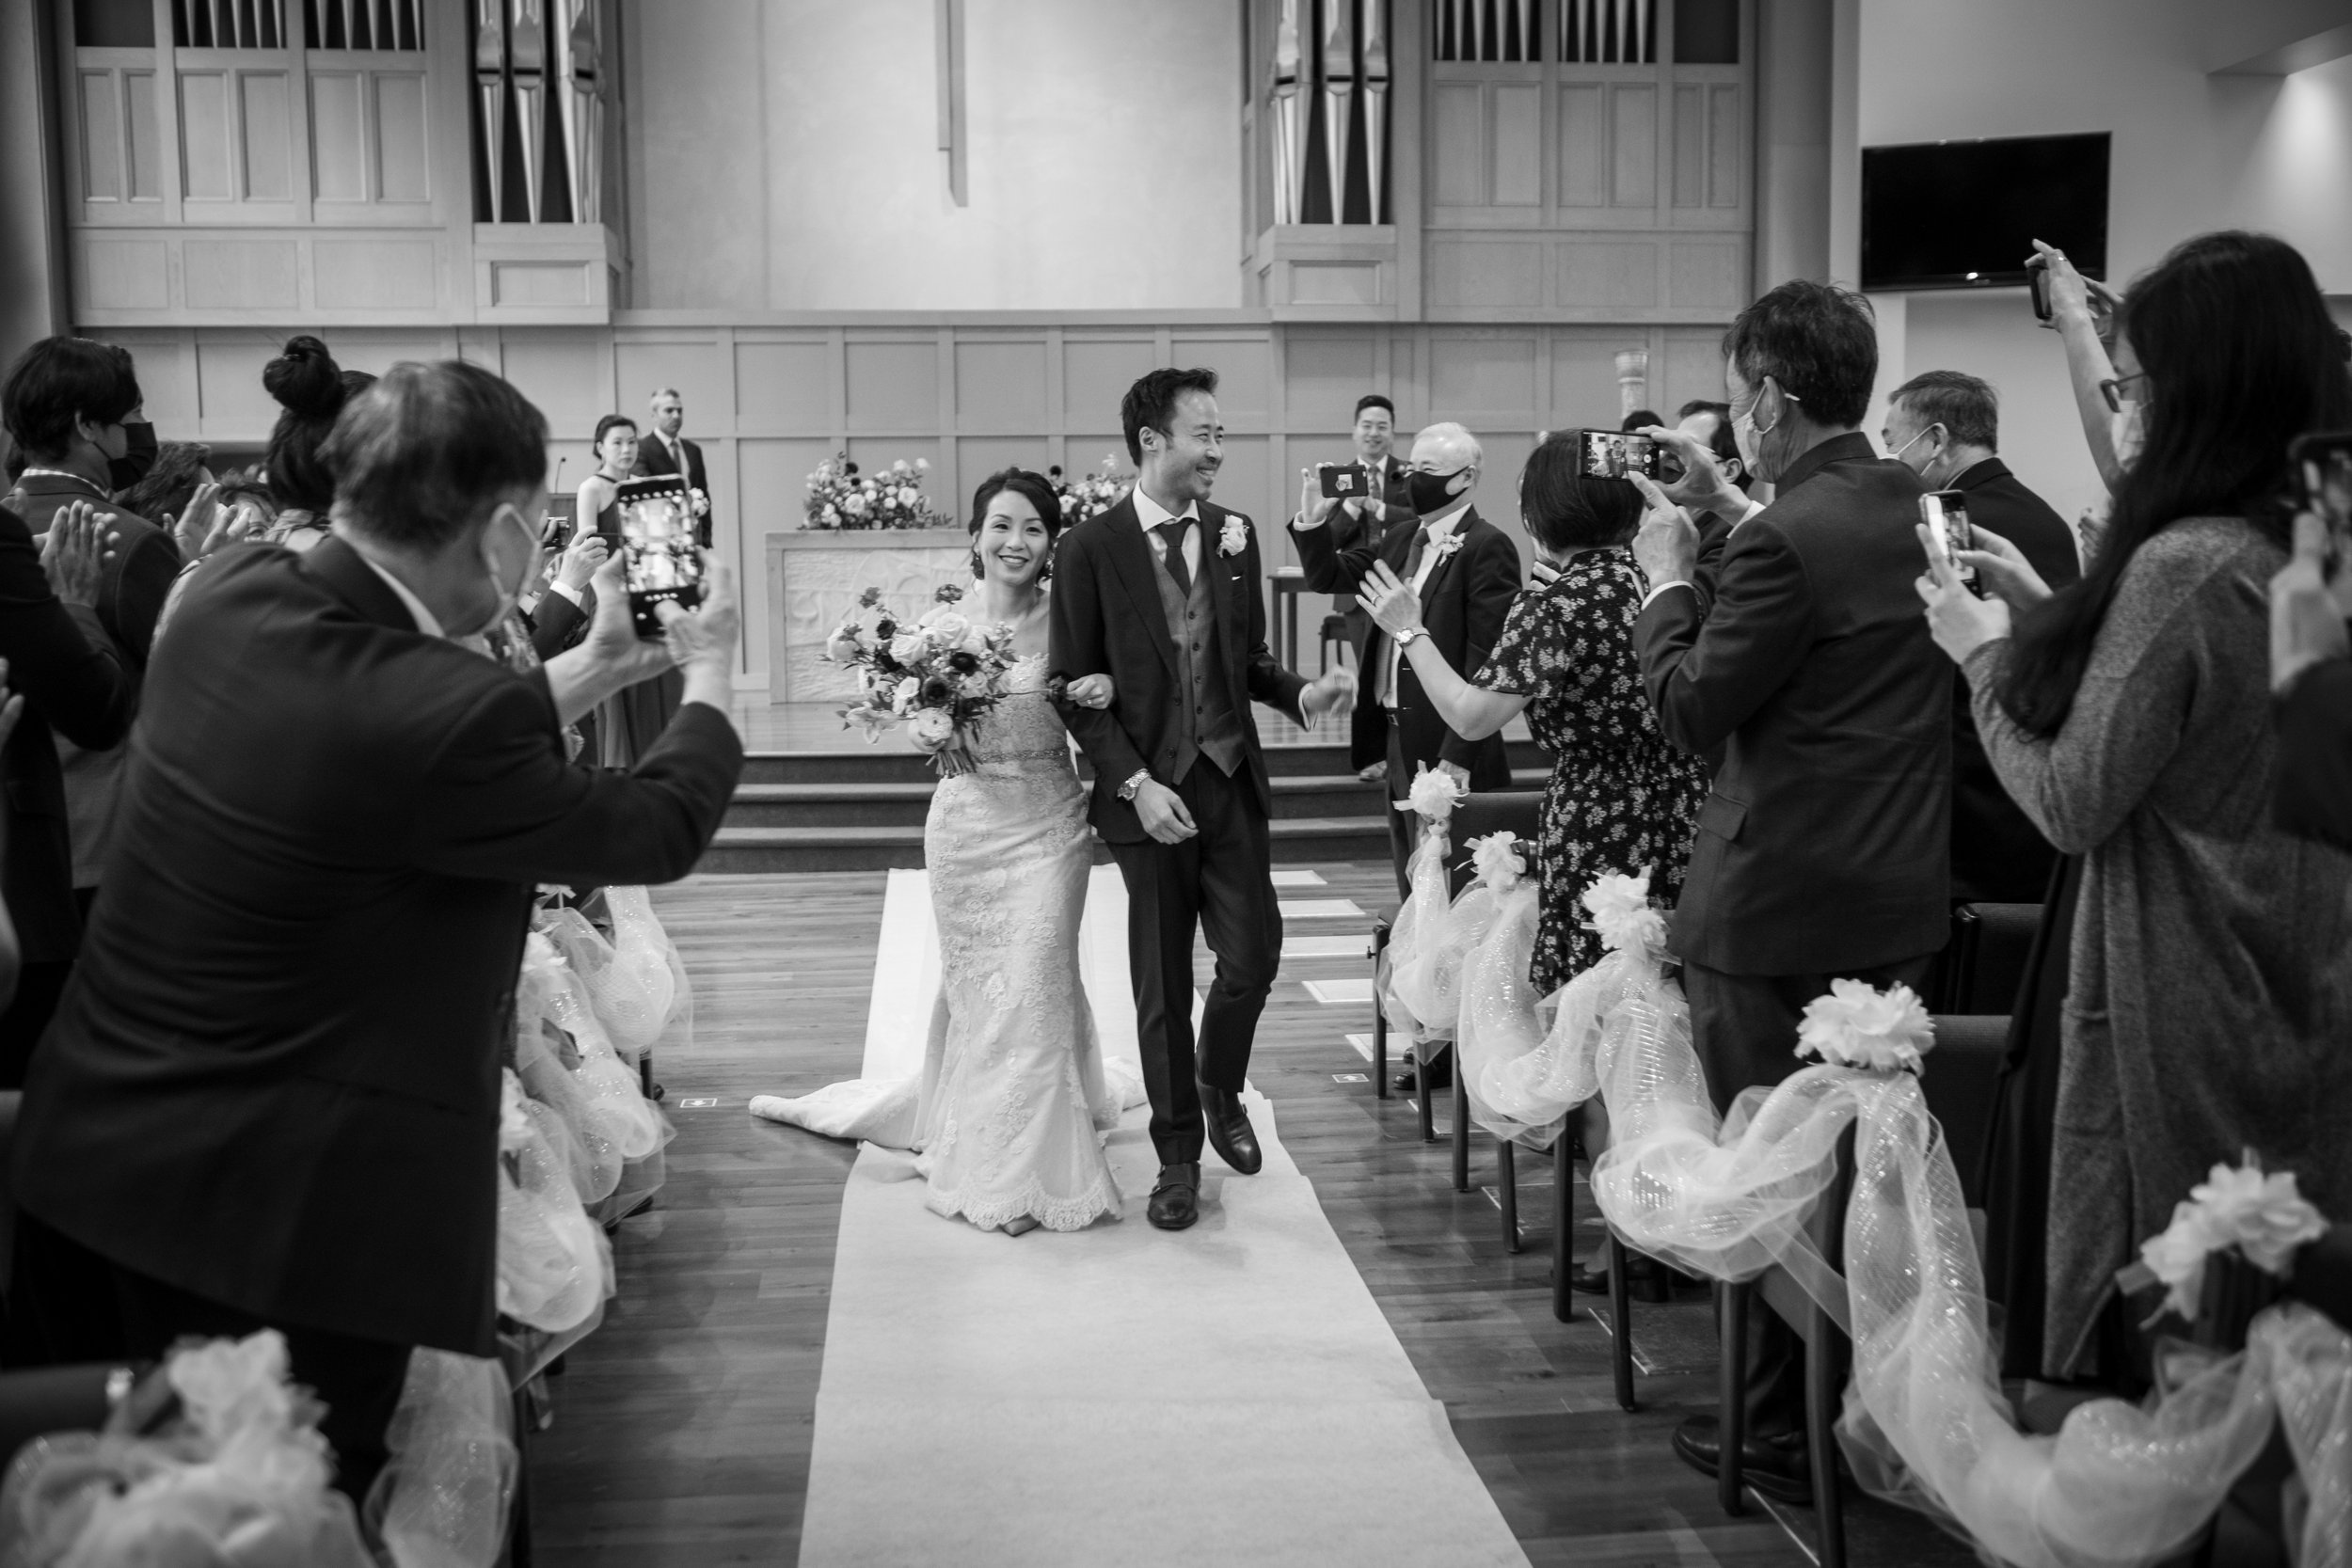  A candid wedding photograph of Jennifer + Jarvis walkingdown the wedding aisle at Lawrence Park Community Church  before their wedding reception later at Graydon Hall in Toronto, Ontario.  Photograph by Toronto Wedding Photographer Scott Williams.  